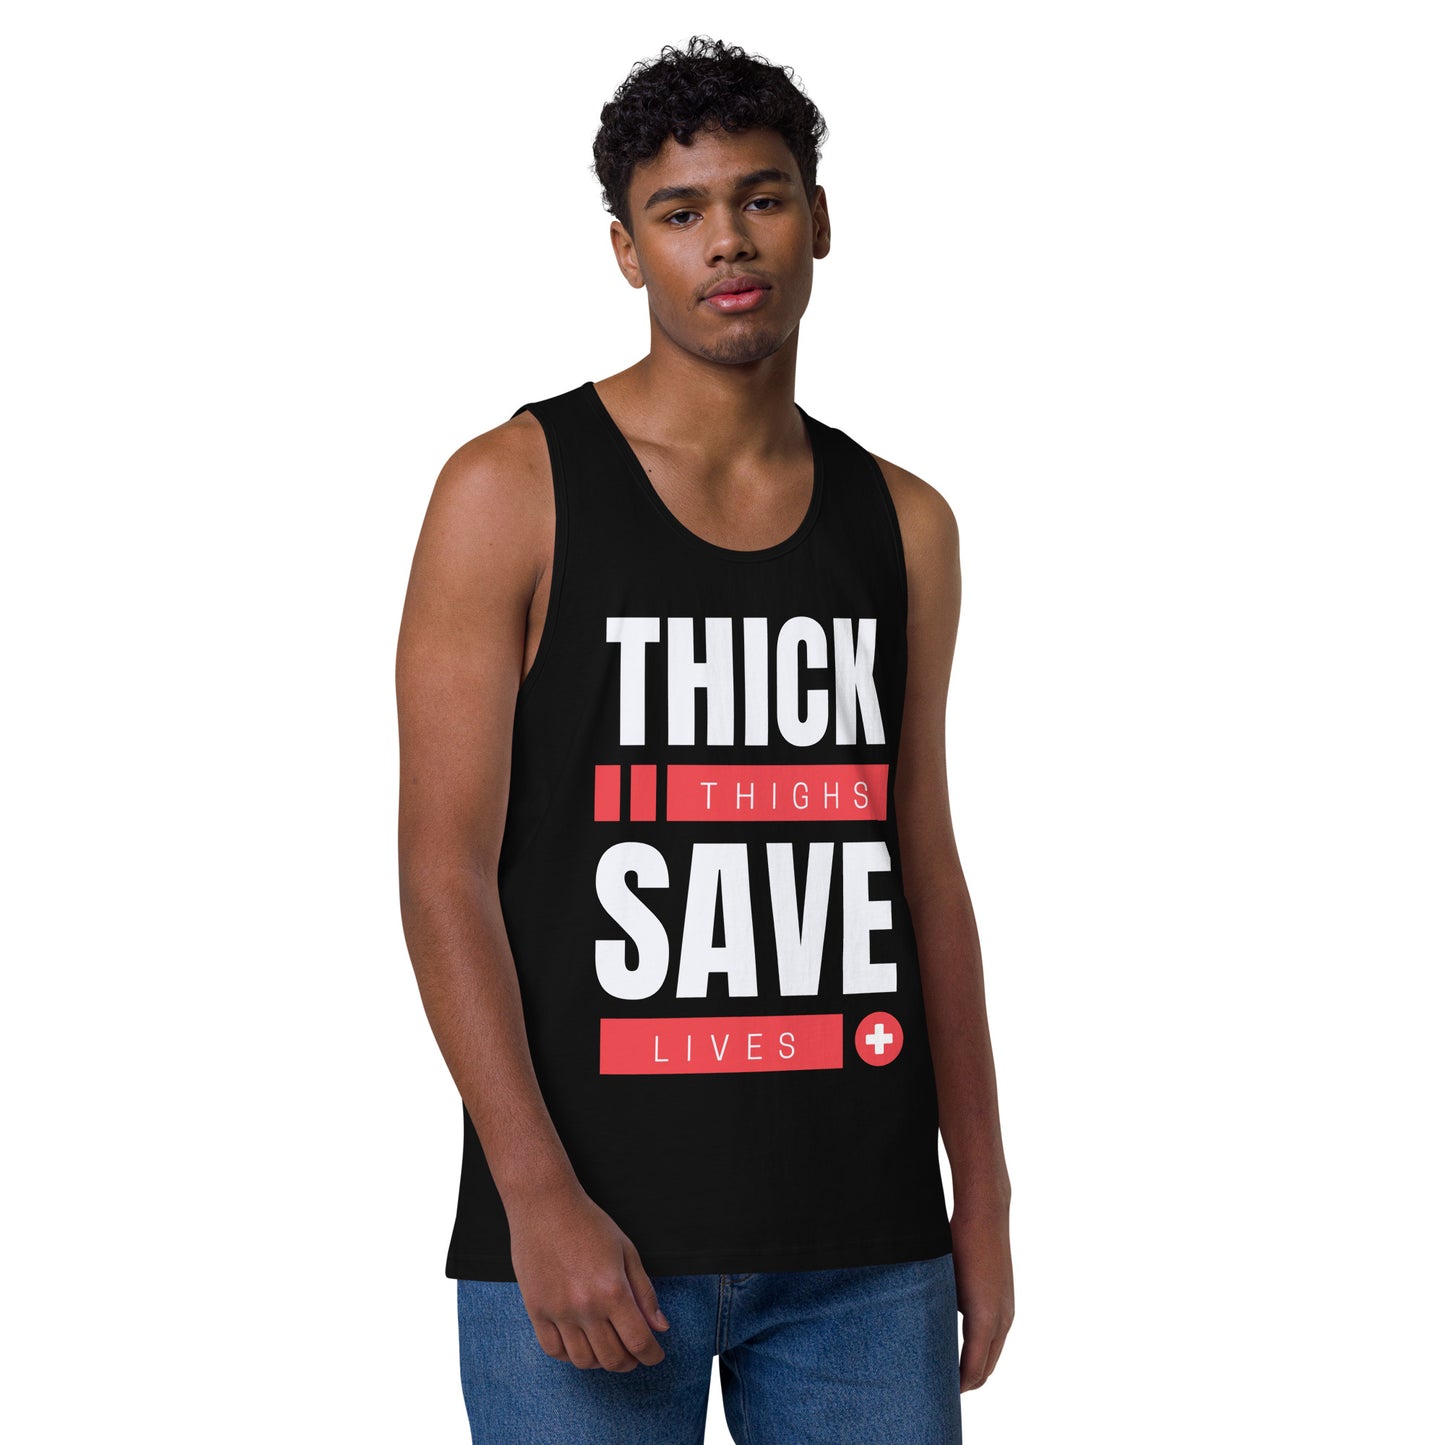 Thick thighs save lives- Men’s premium tank top